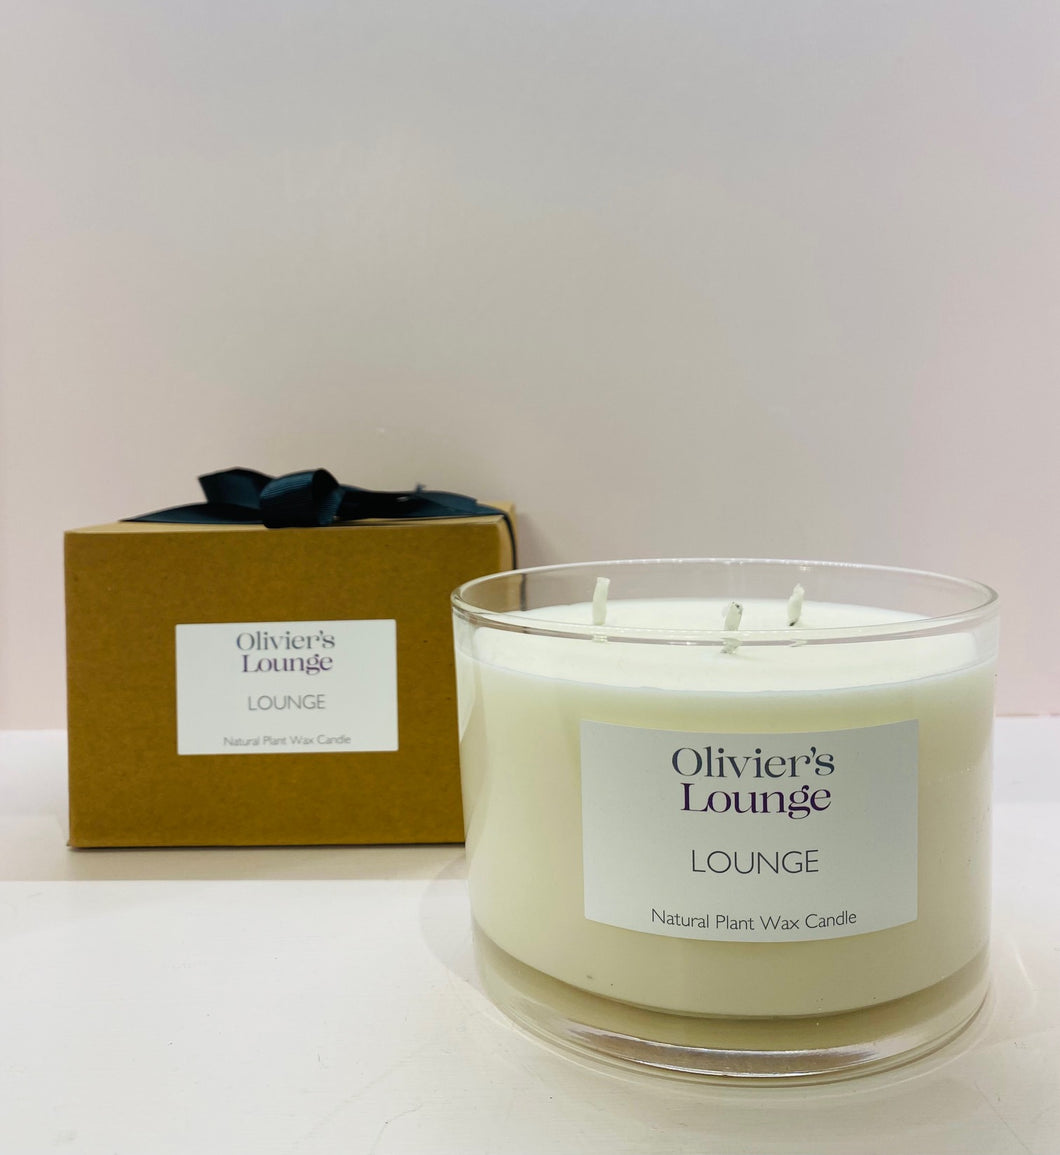 Olivier's Lounge large 3 wick candle